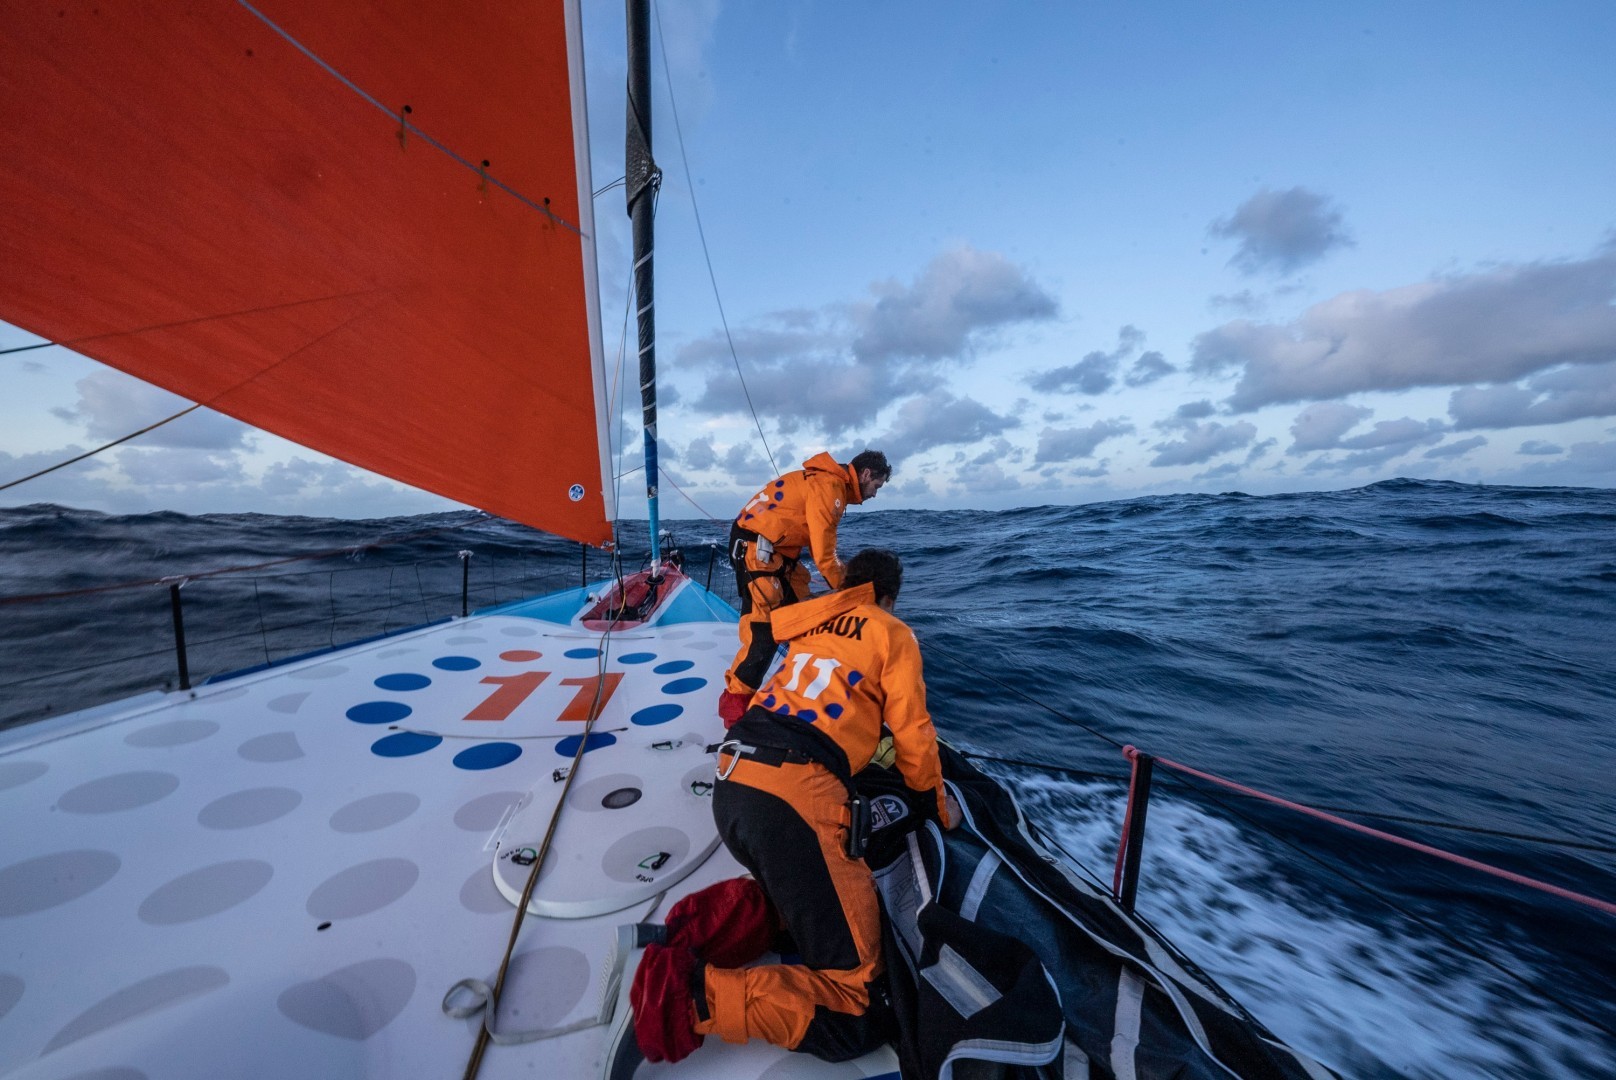 The Ocean Race 2022-23 - 01 April 2023, Leg 3, Day 34 onboard 11th Hour Racing Team. Jack Bouttell and Justine Mettraux on the bow during a sail change.
© Amory Ross / 11th Hour Racing / The Ocean Race